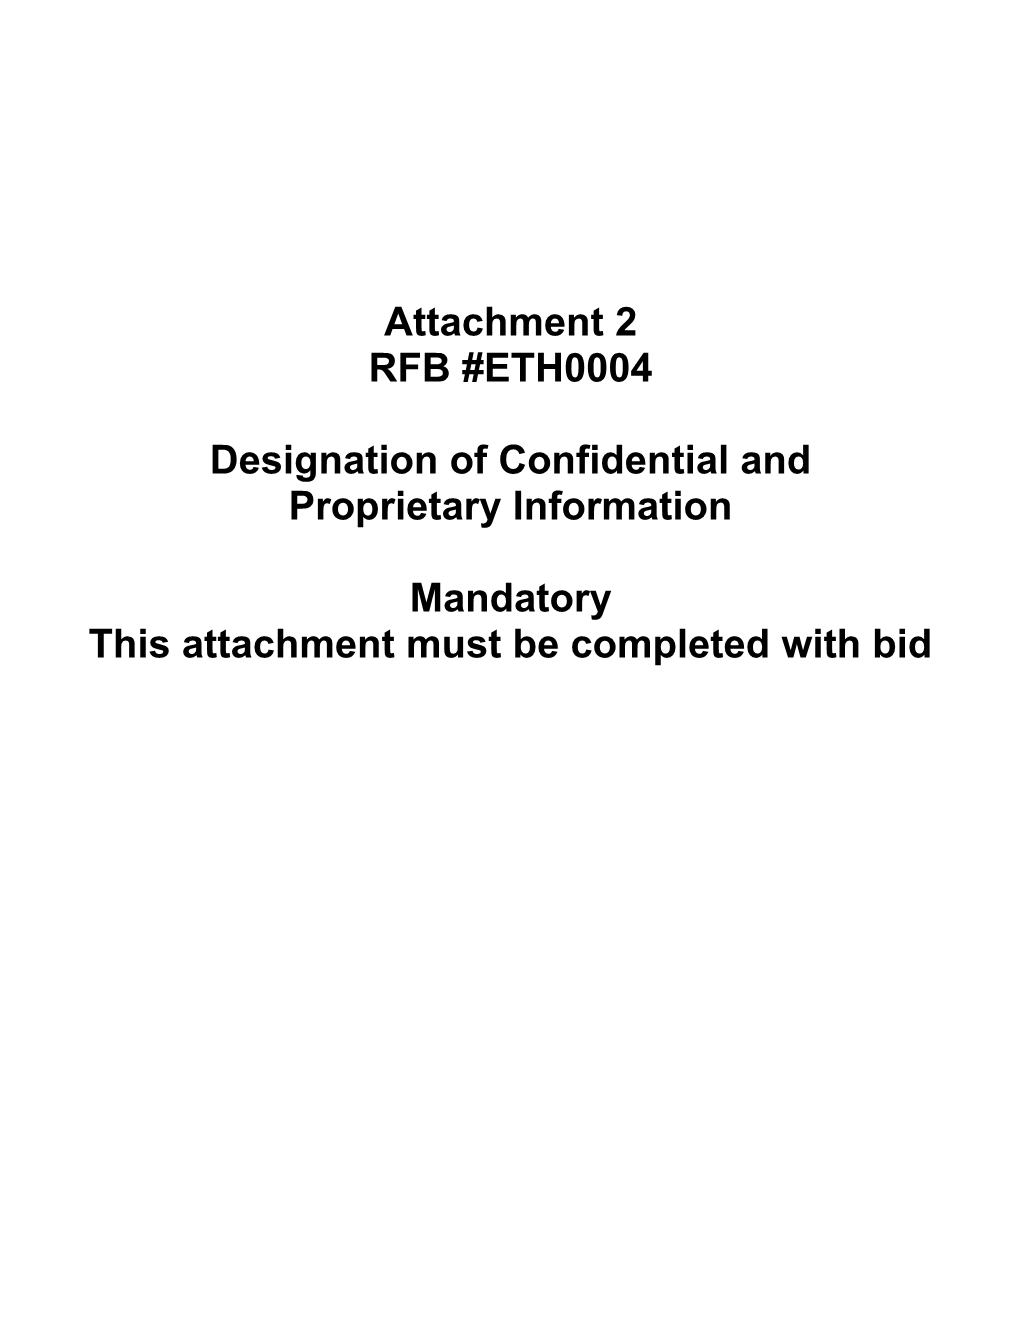 This Attachment Must Be Completed with Bid